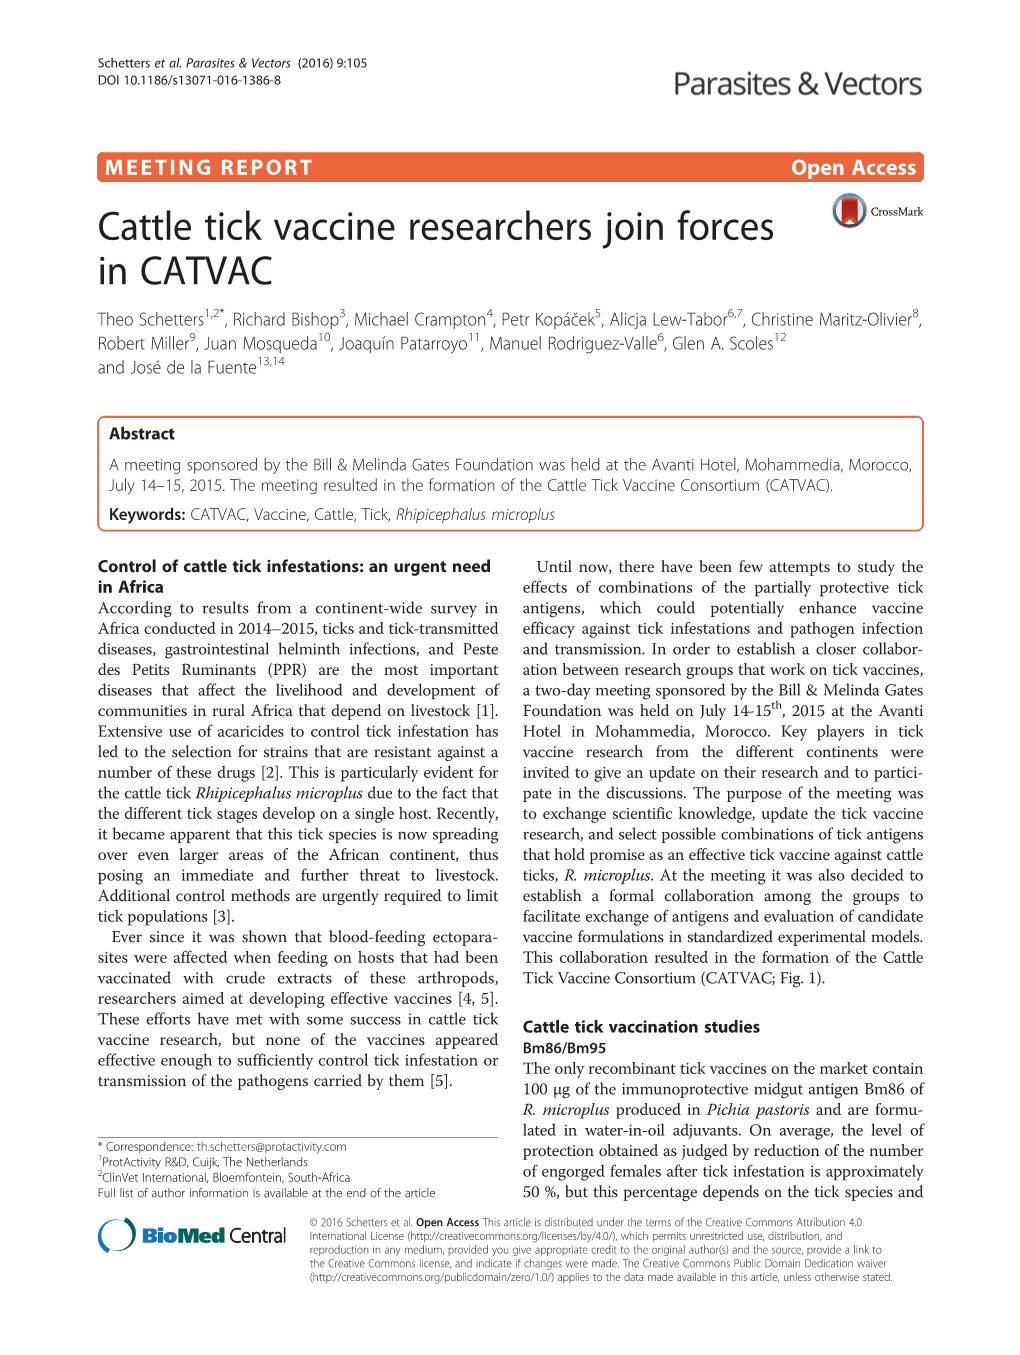 Cattle Tick Vaccine Researchers Join Forces in CATVAC